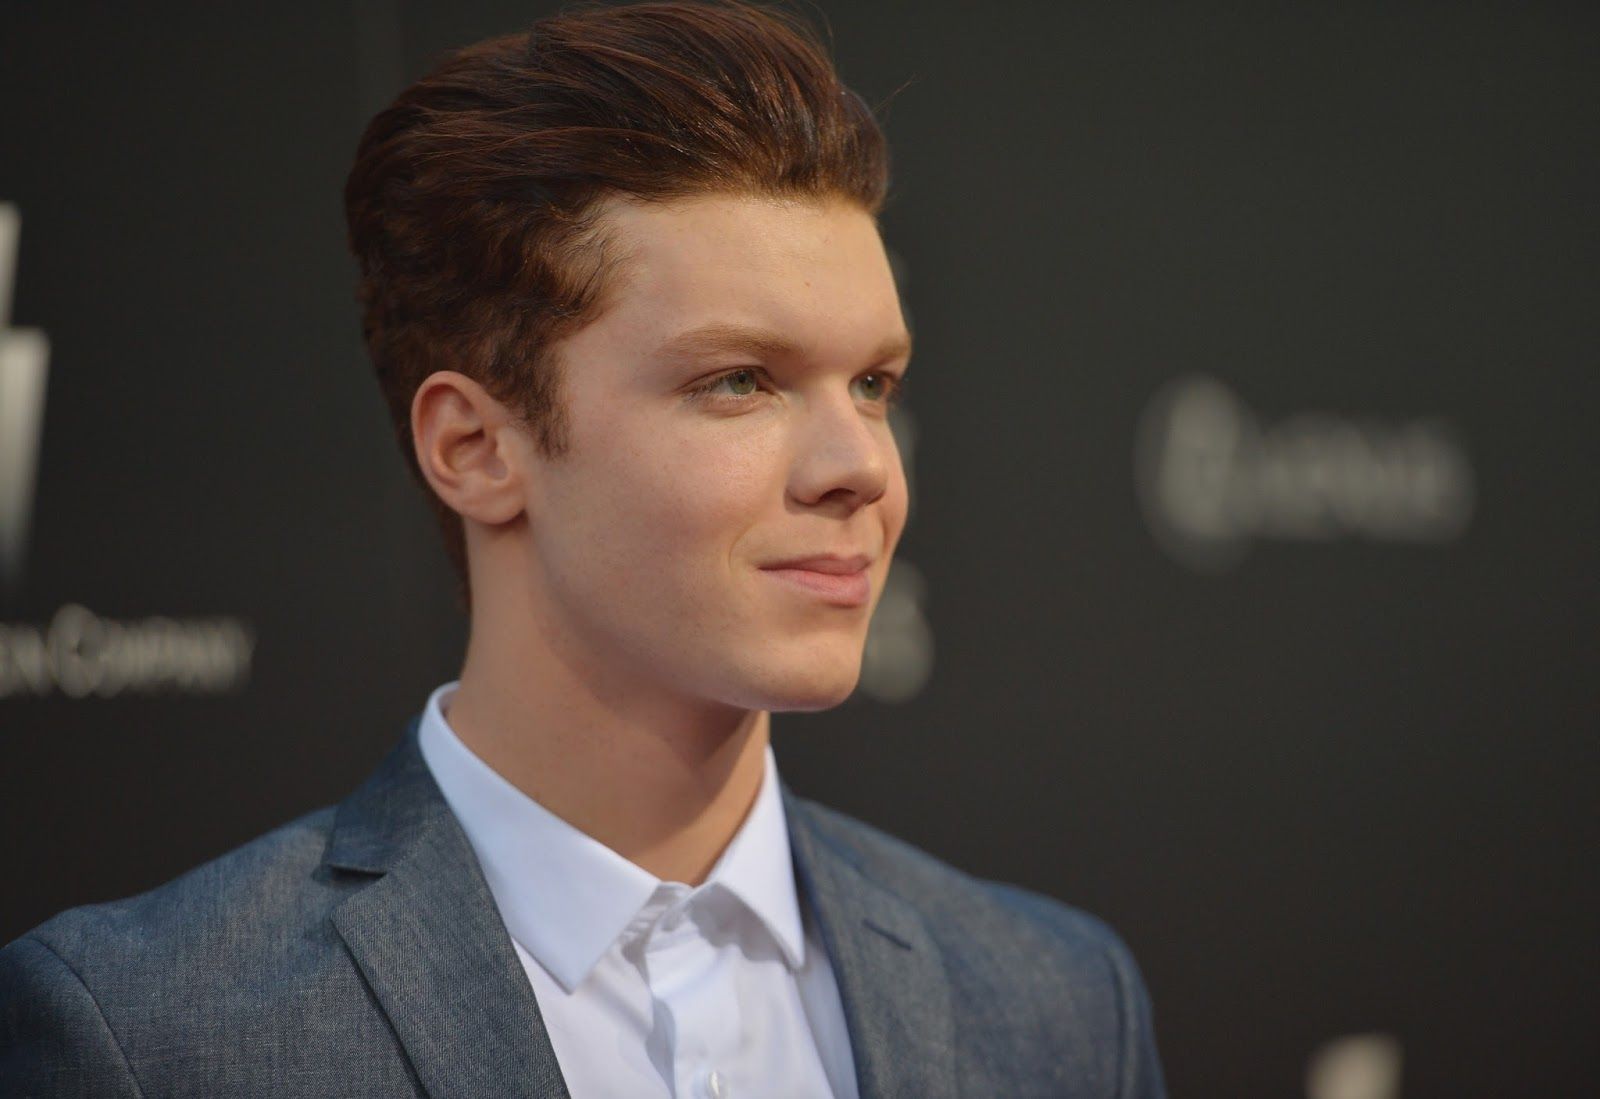 6. Cameron Monaghan's Blonde Hair: How to Maintain It - wide 2